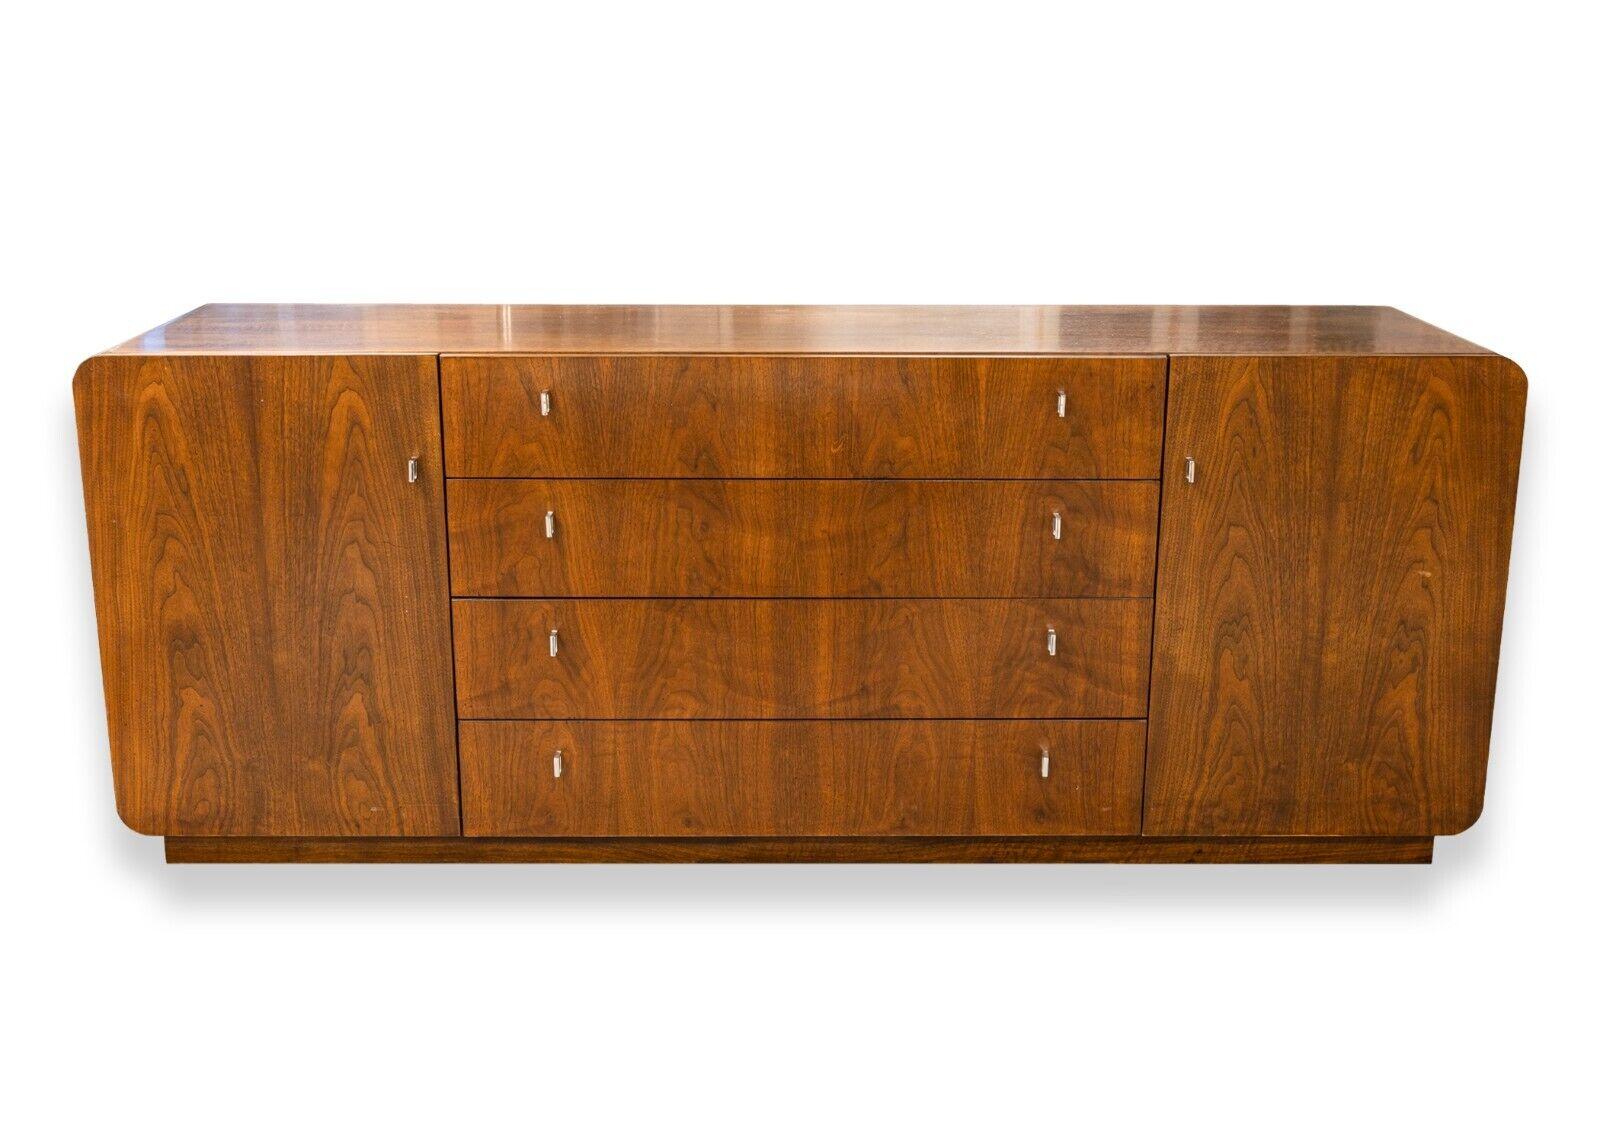 A mid century modern Founders walnut and chrome dresser credenza and mirror. An absolutely jaw dropping piece of furniture from Founders furniture. This piece features an all walnut wood construction with a variety of drawers, cupboards, and a large